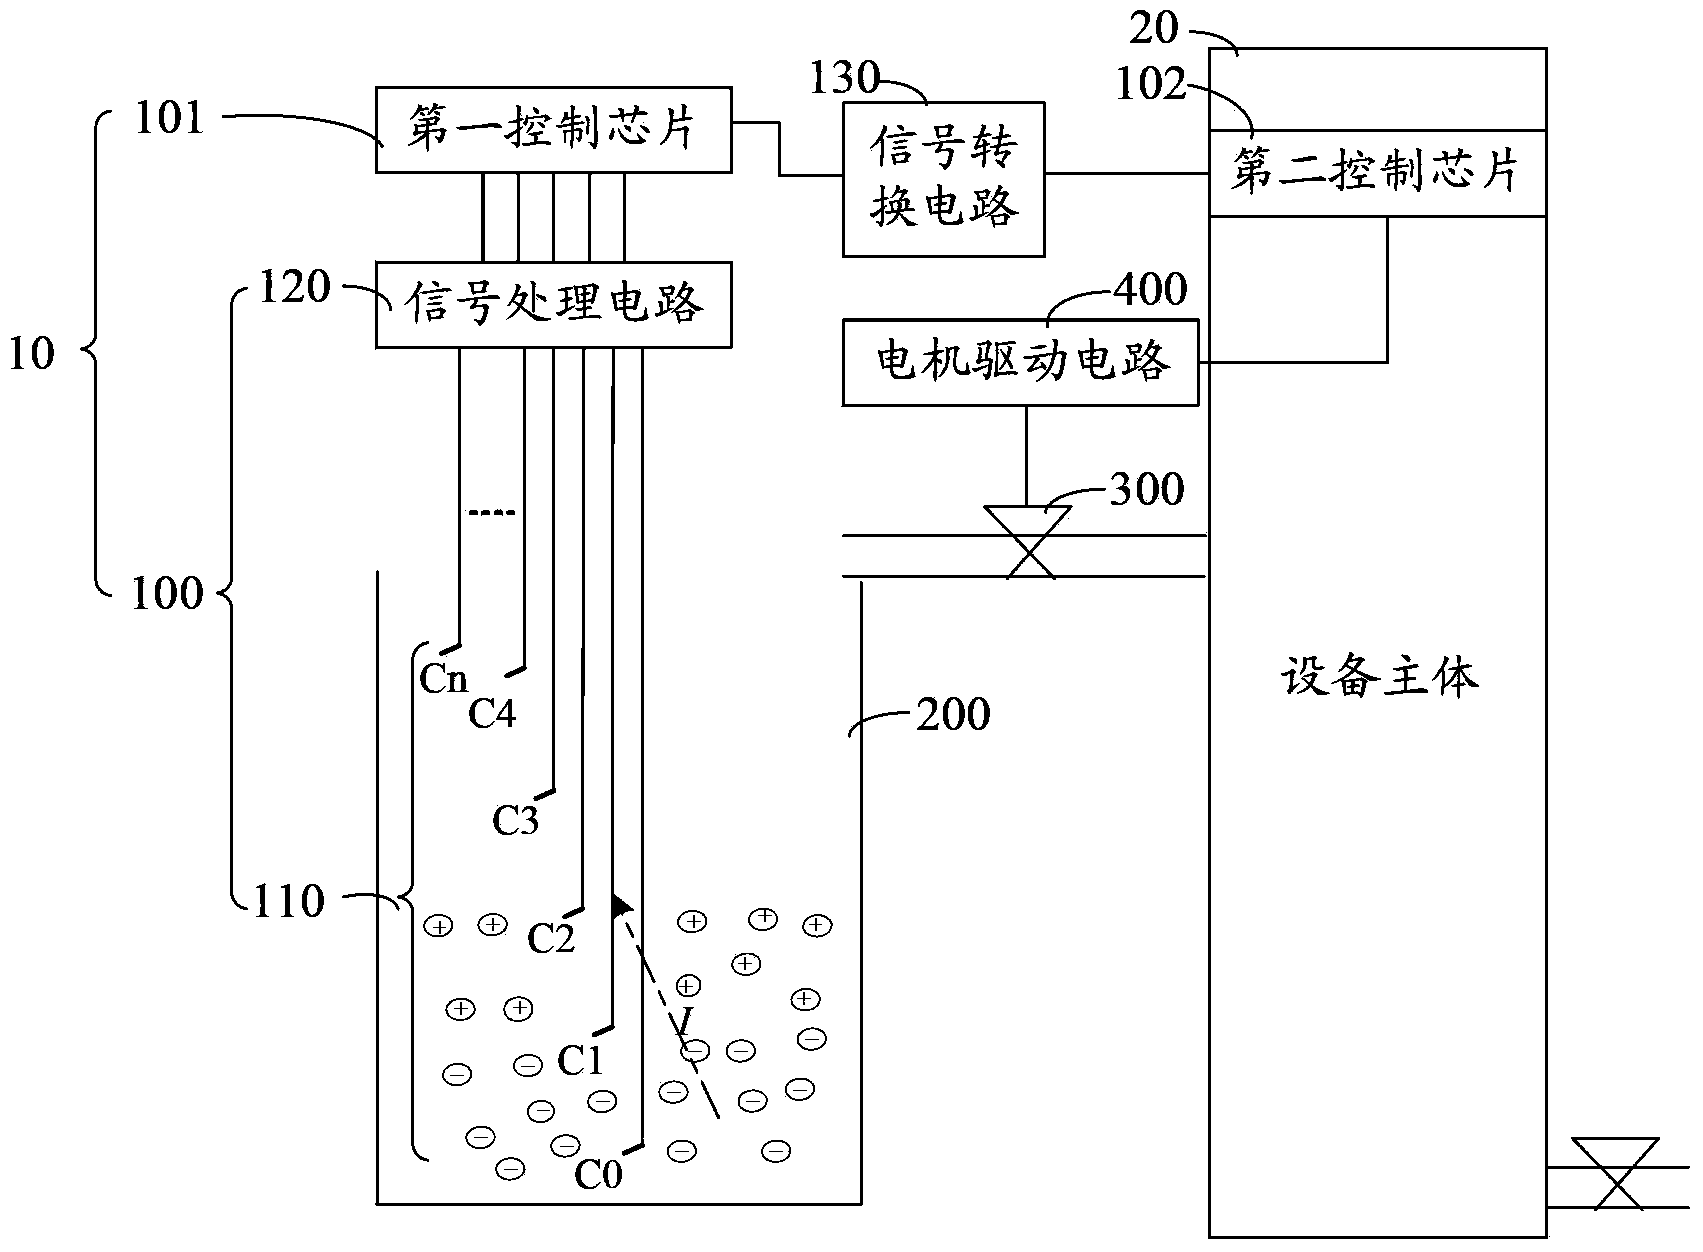 Liquid level detecting circuit, controller and water heater